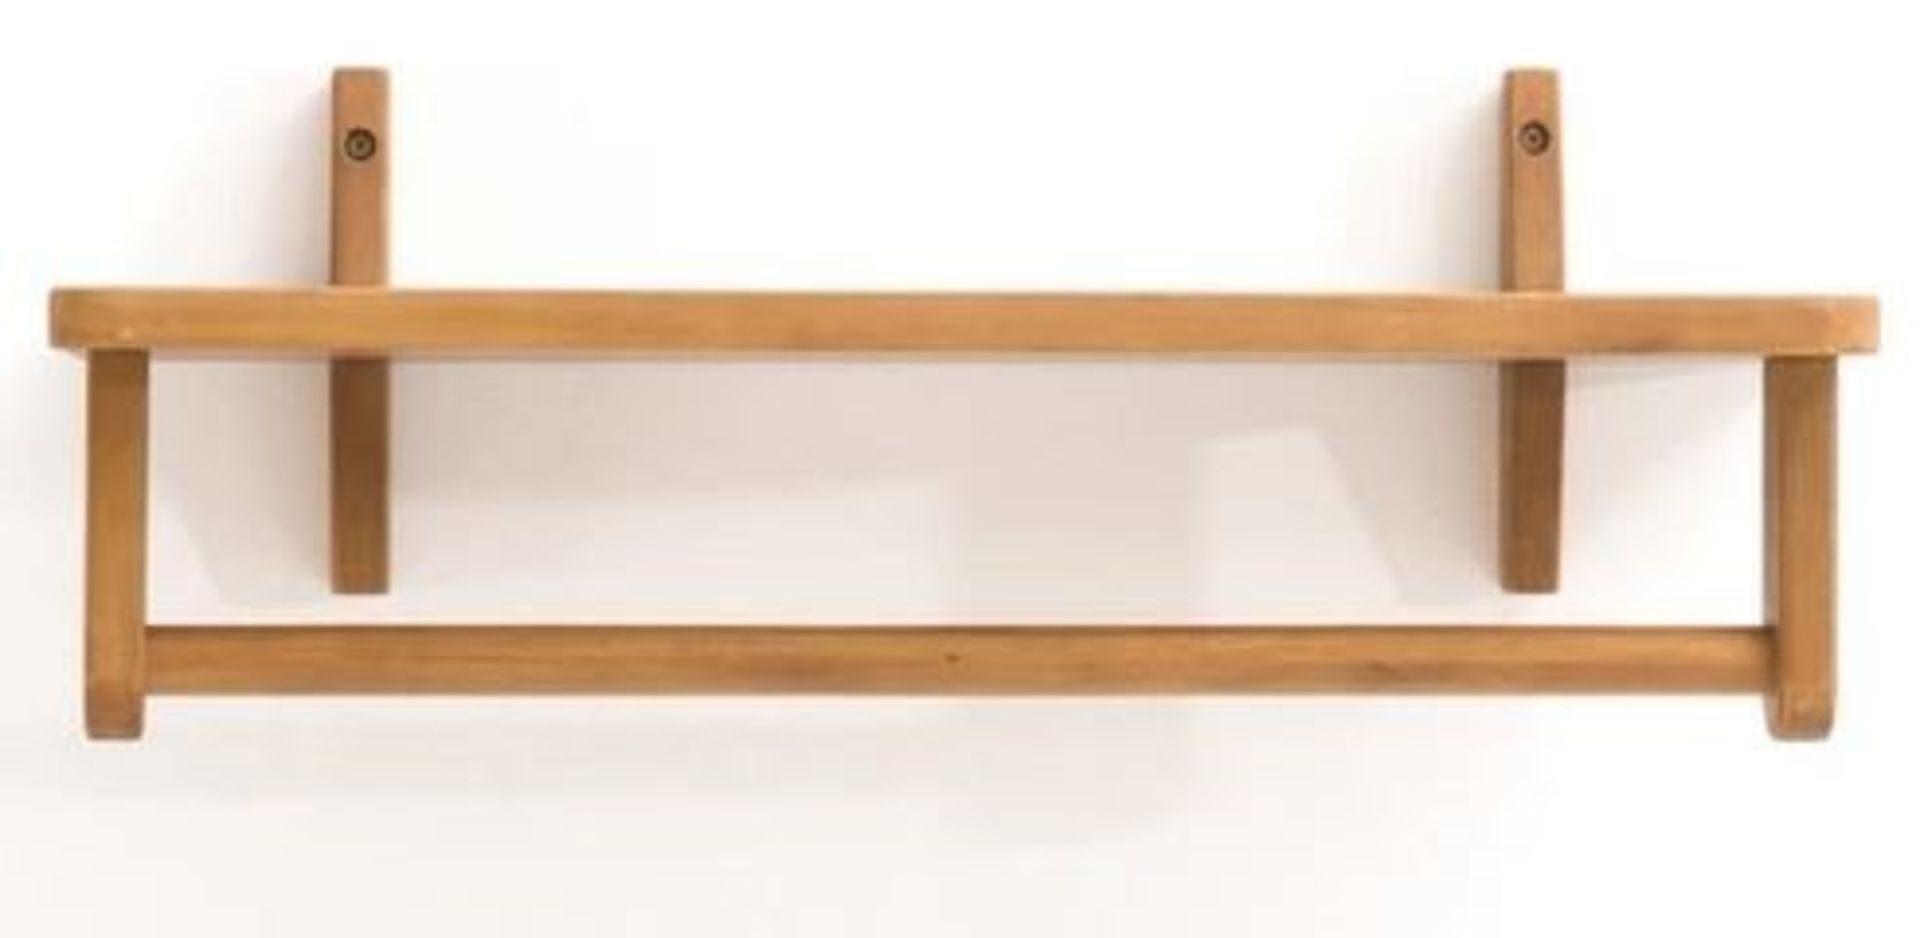 1 GRADE B BOXED LA REDOUTE ACACIA WOOD WALL SHELF / RRP £18.00 (PUBLIC VIEWING AVAILABLE) - Image 2 of 2